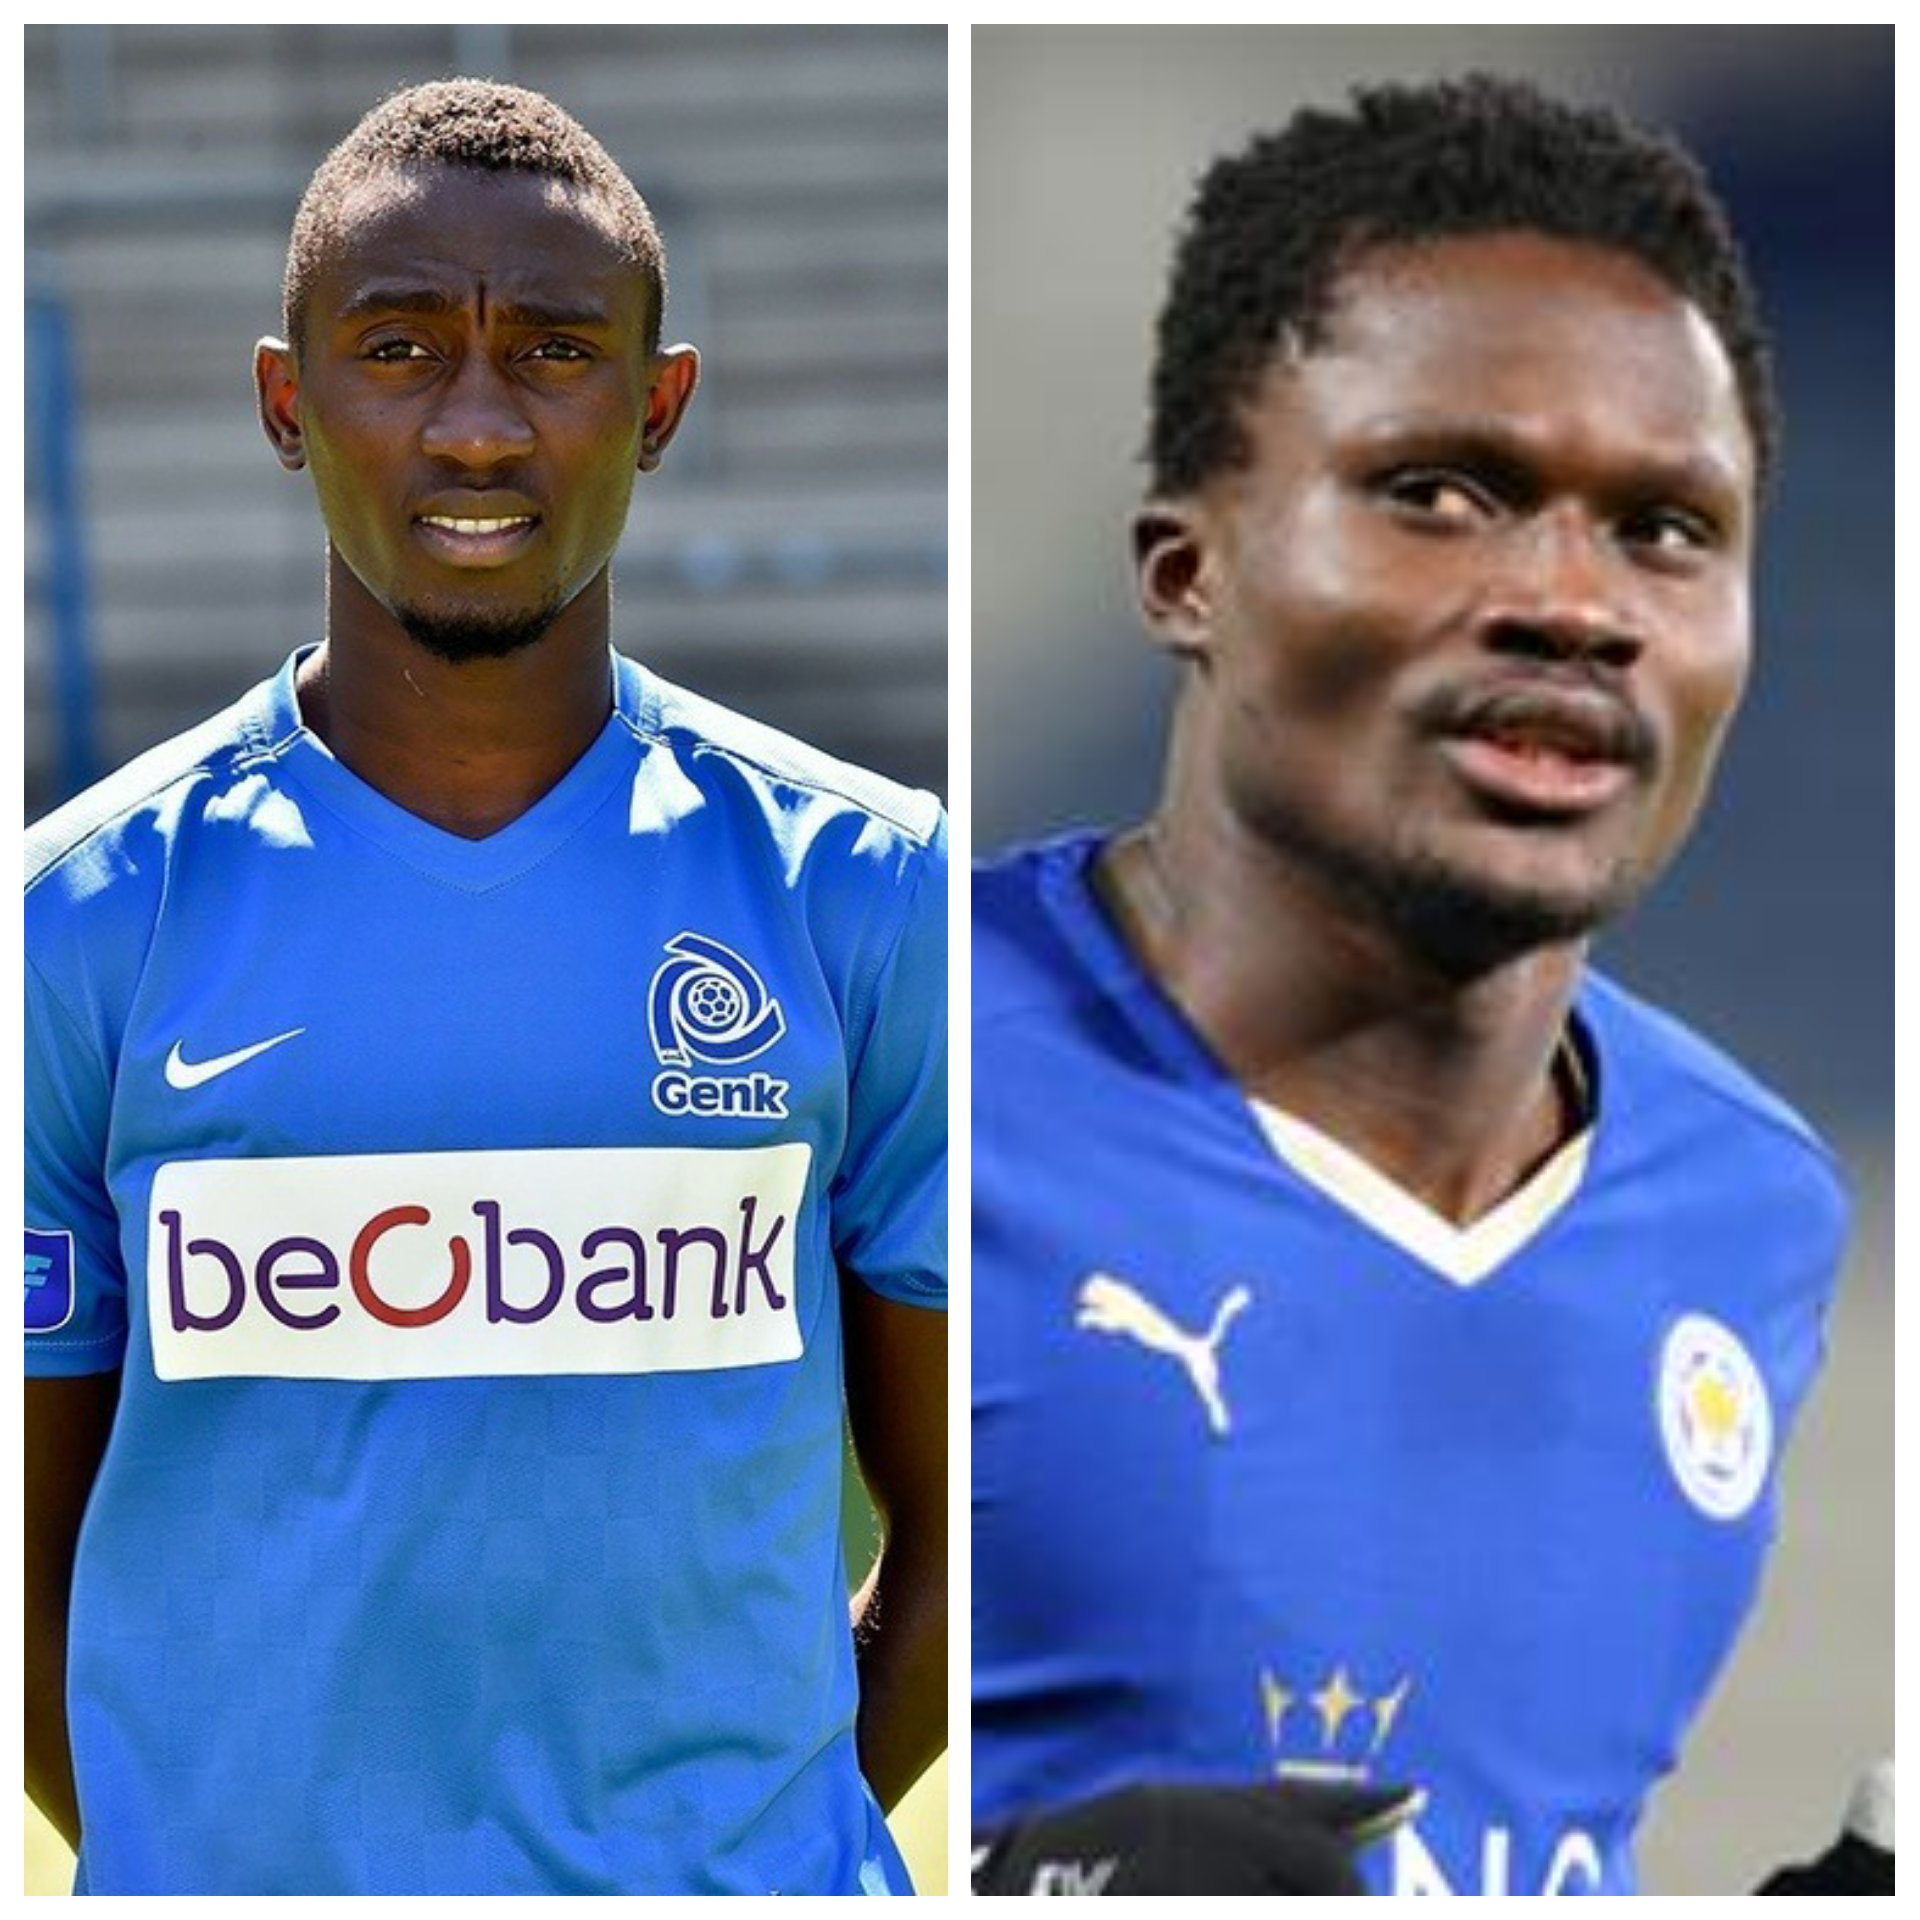 Leicester City sign Genk midfielder Wilfred Ndidi as replacement for Daniel Amartey